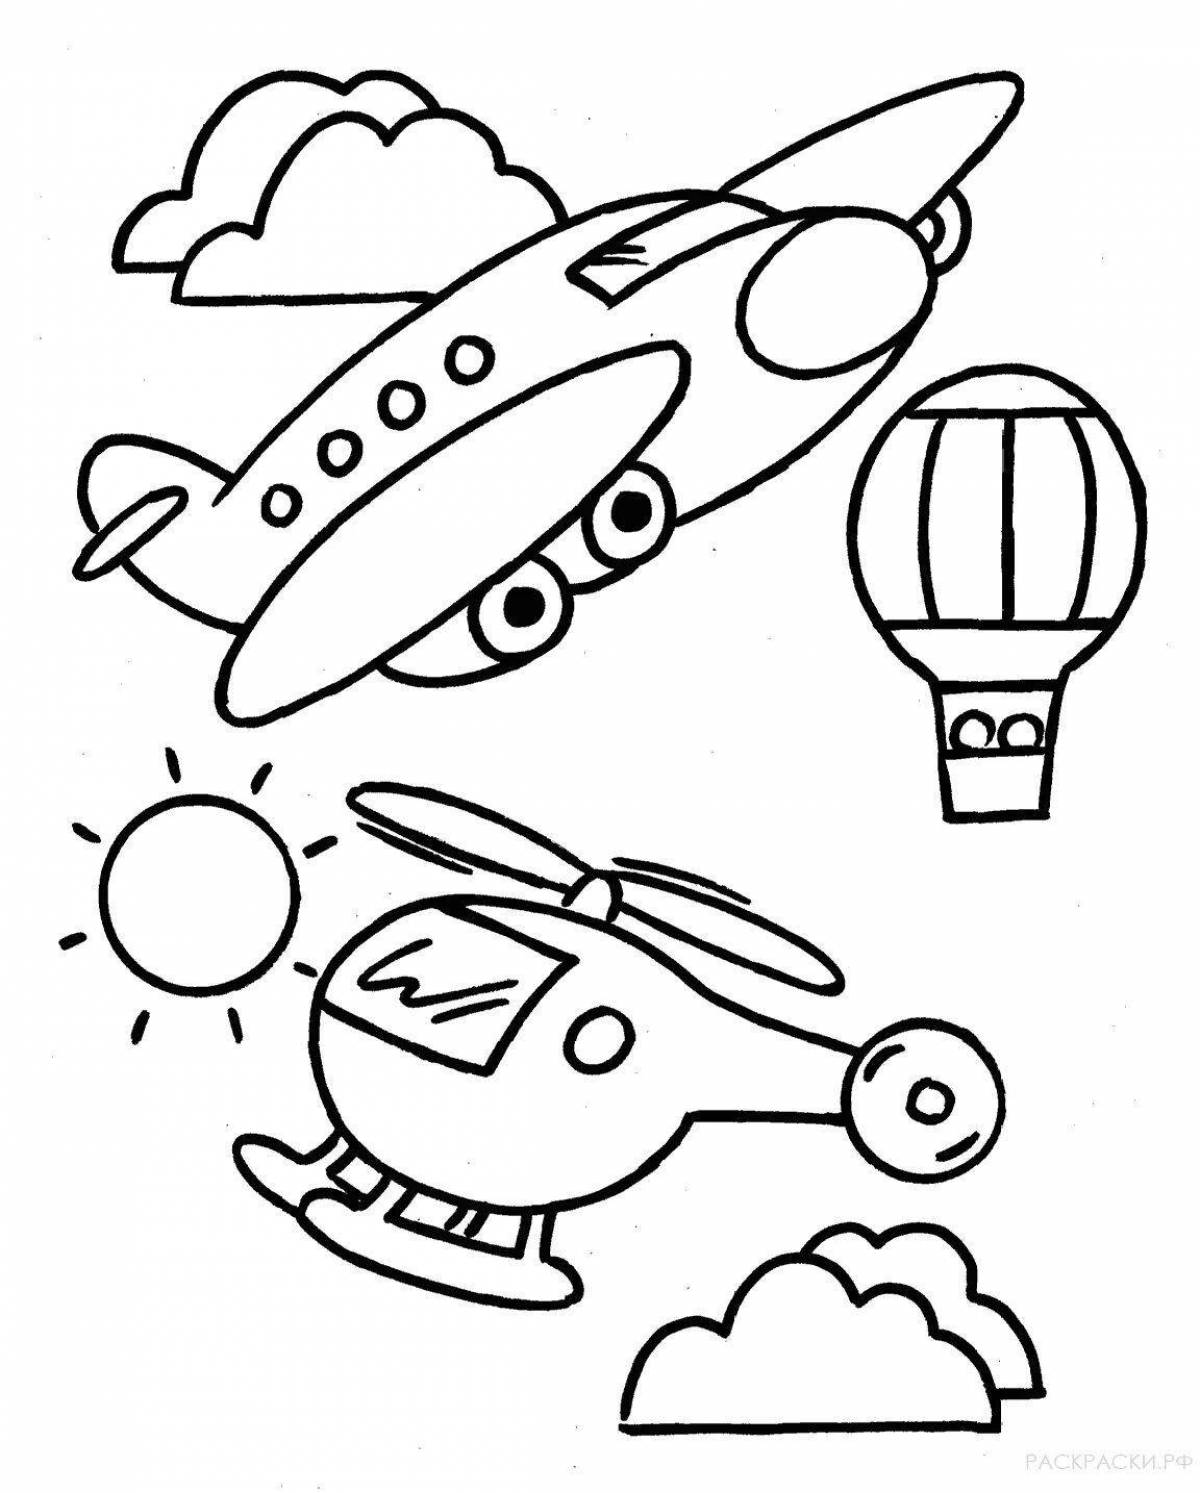 Sweet plane coloring book for 4-5 year olds